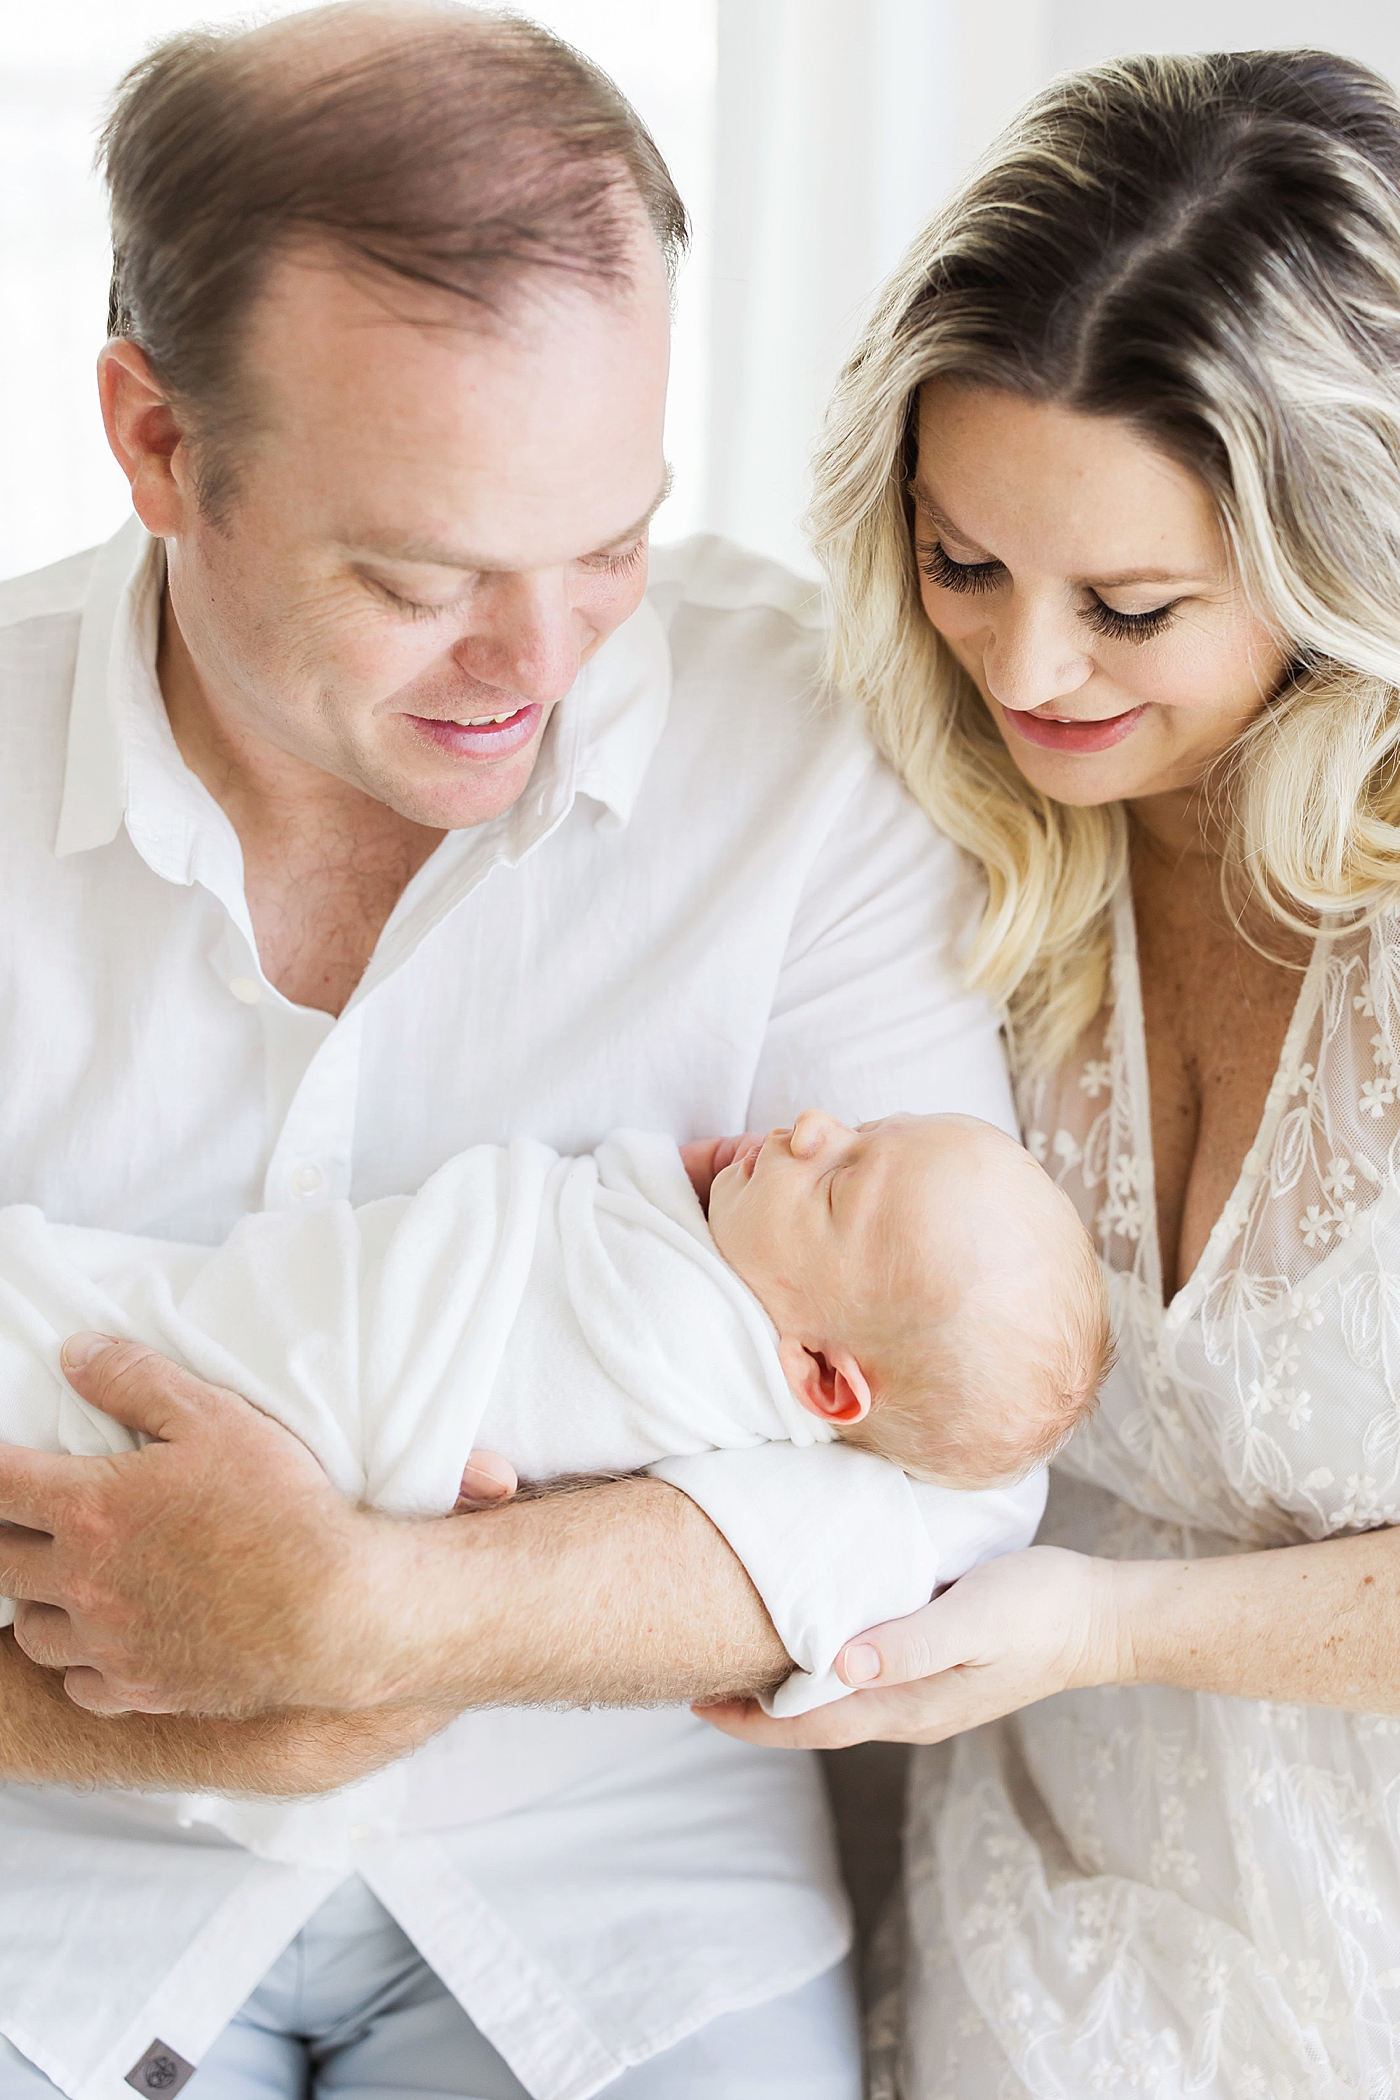 New parents with their newborn son. Photo by Fresh Light Photography.